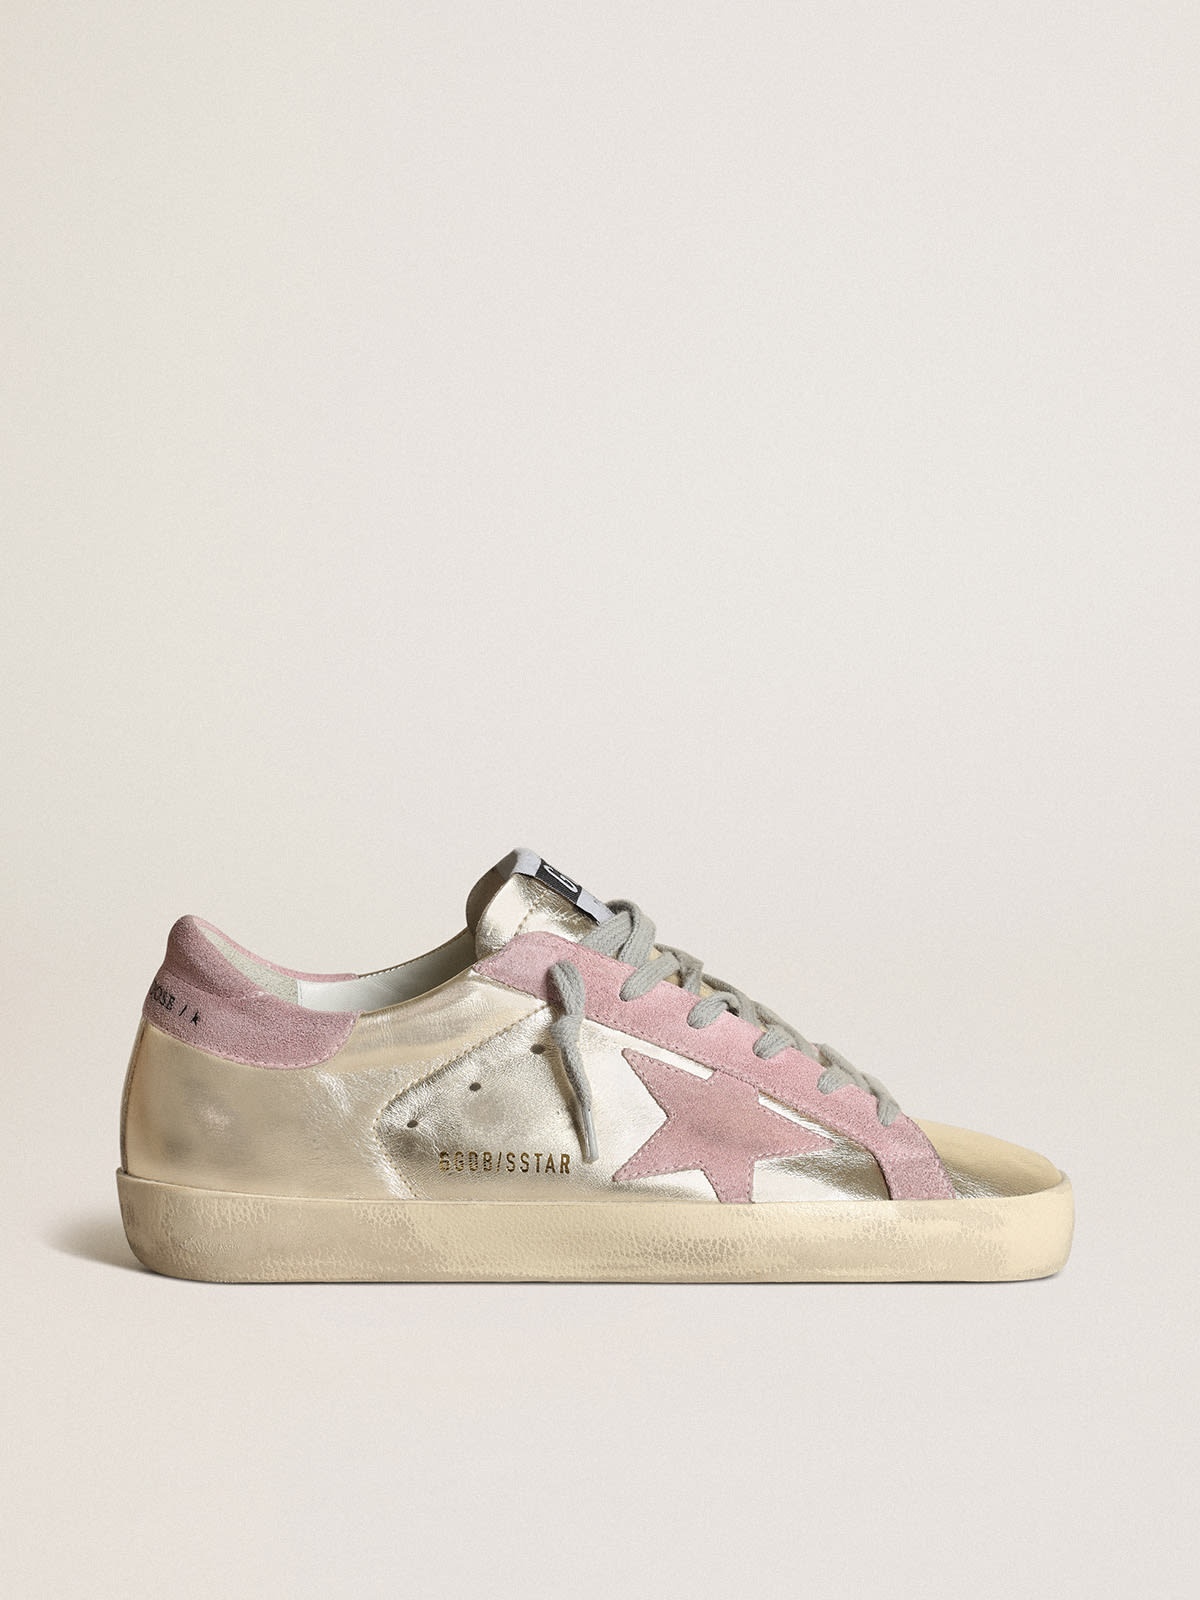 Super-Star LTD sneakers in platinum metallic leather with pink suede star and heel tab - 1